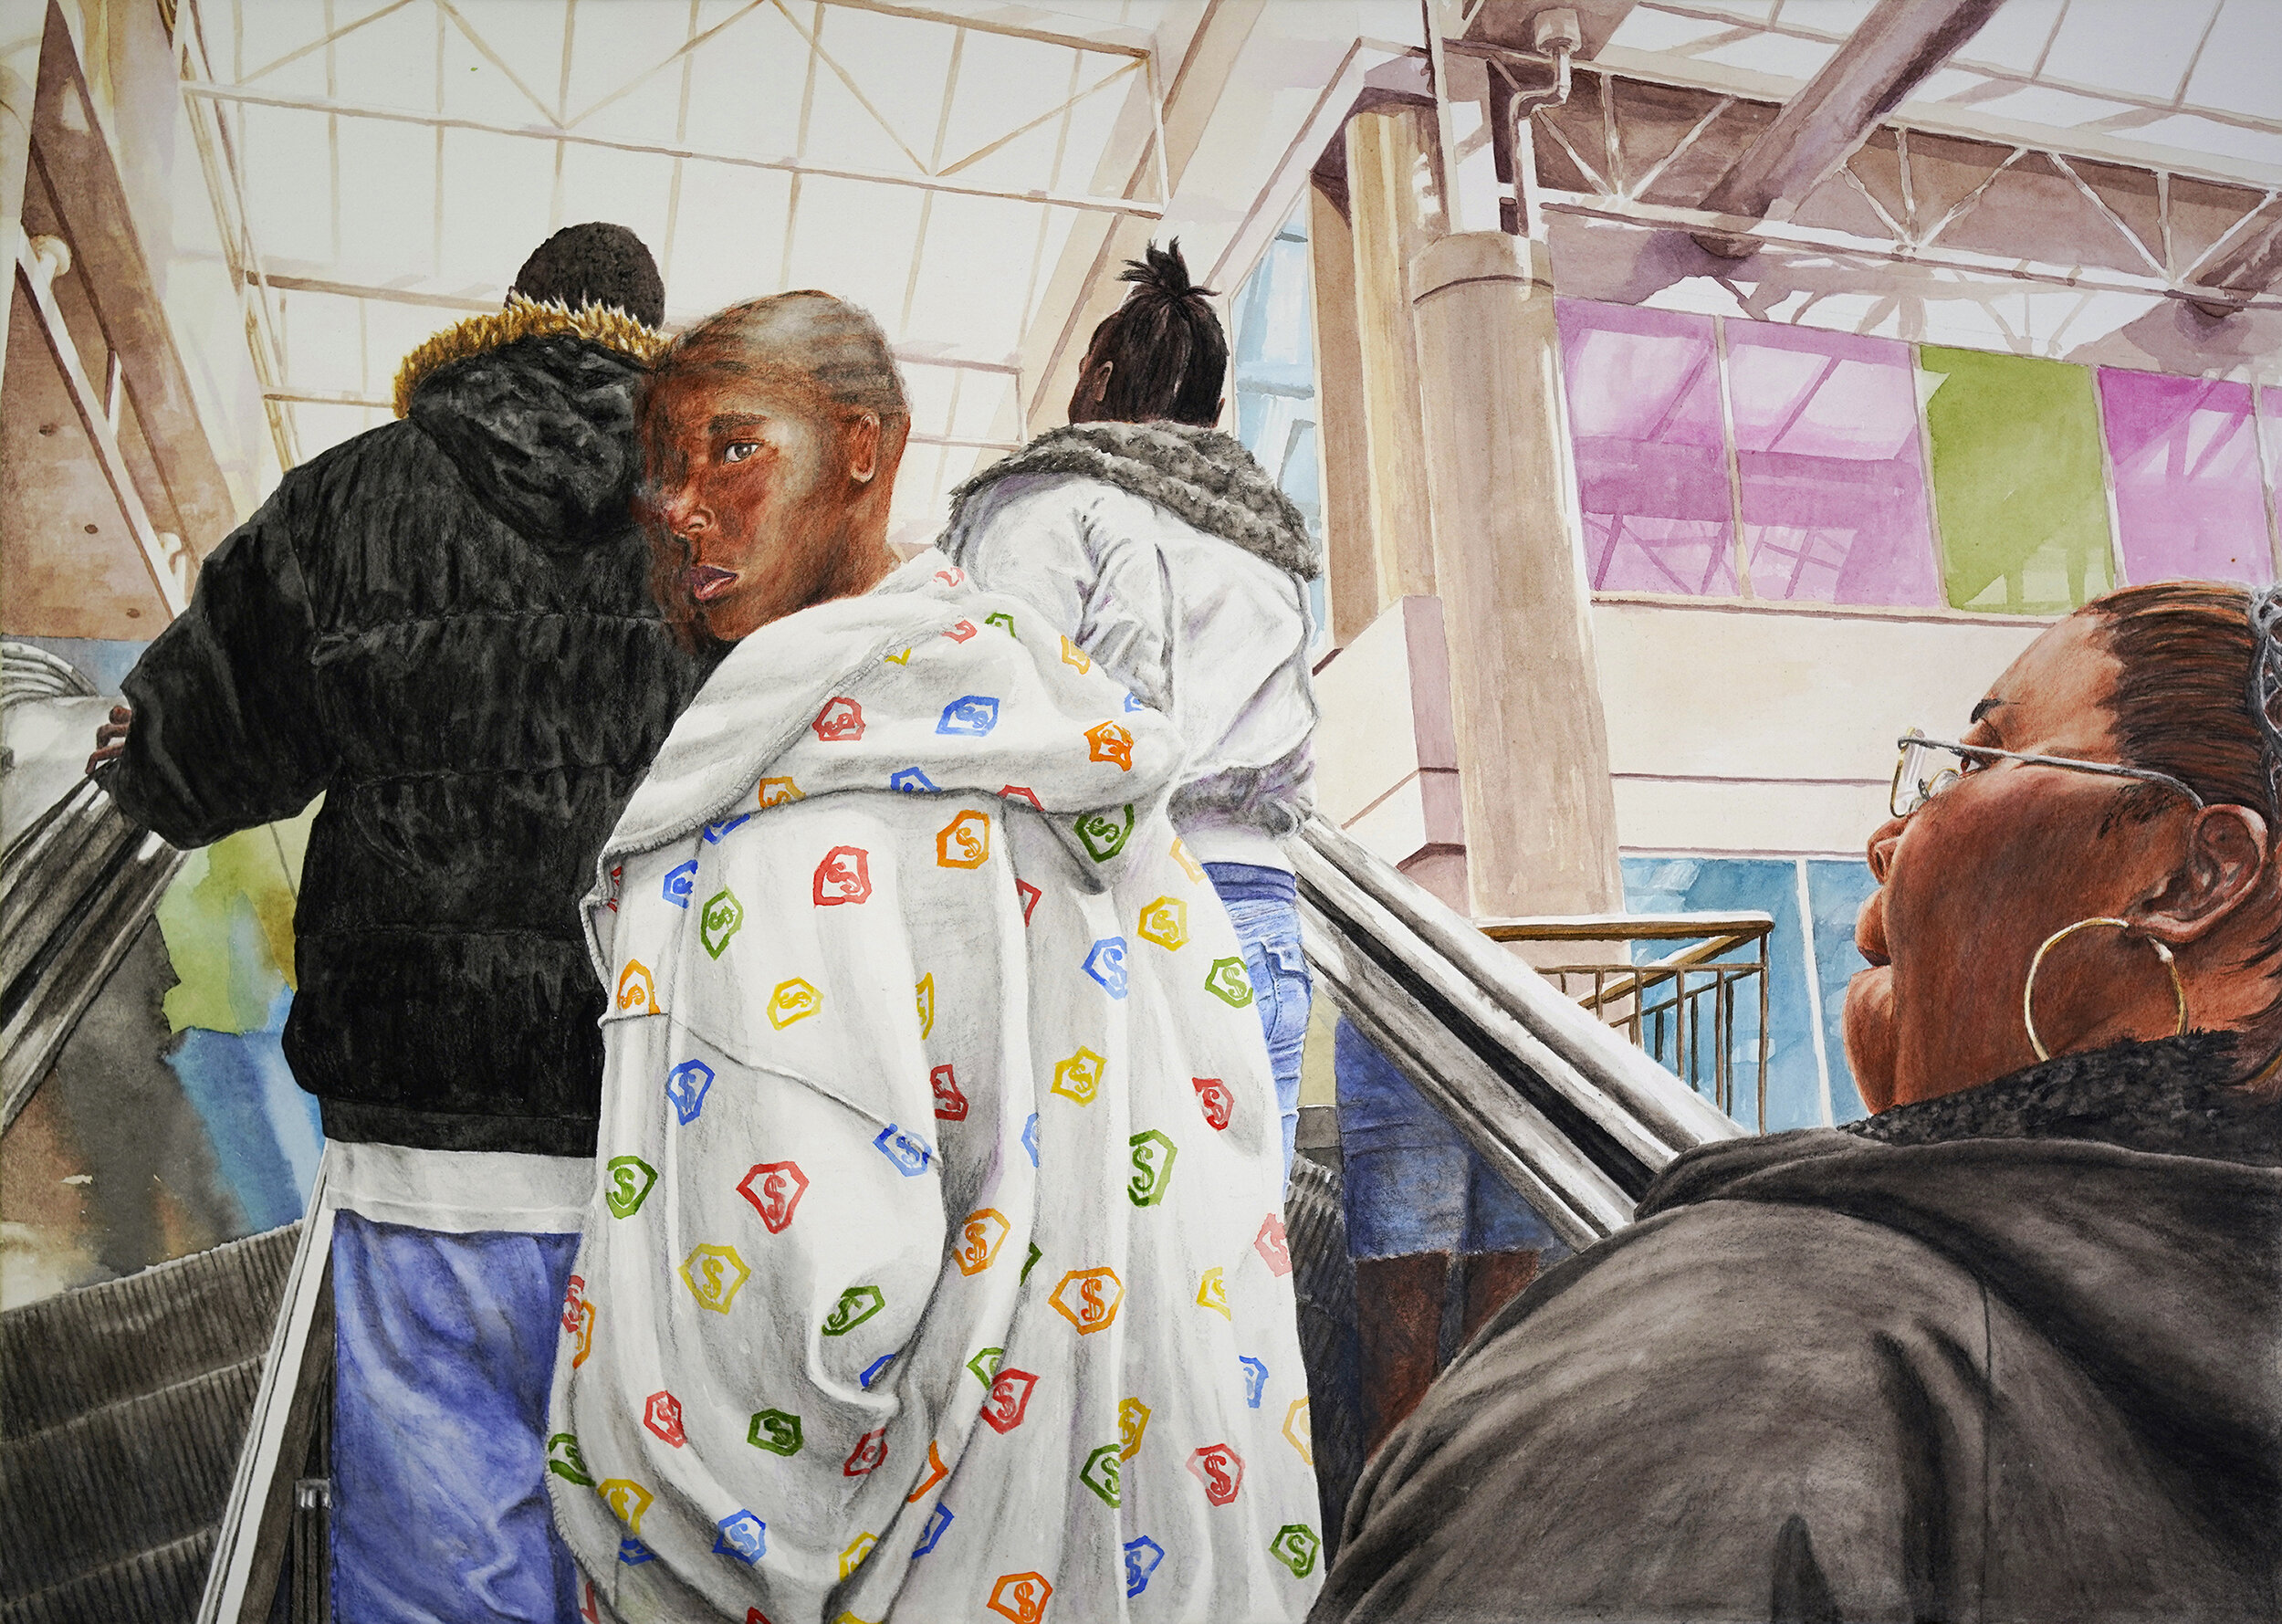   Anthony Turns on the Escalator , 2020, watercolor and watercolor pencil on paper, 50 x 70 cm 